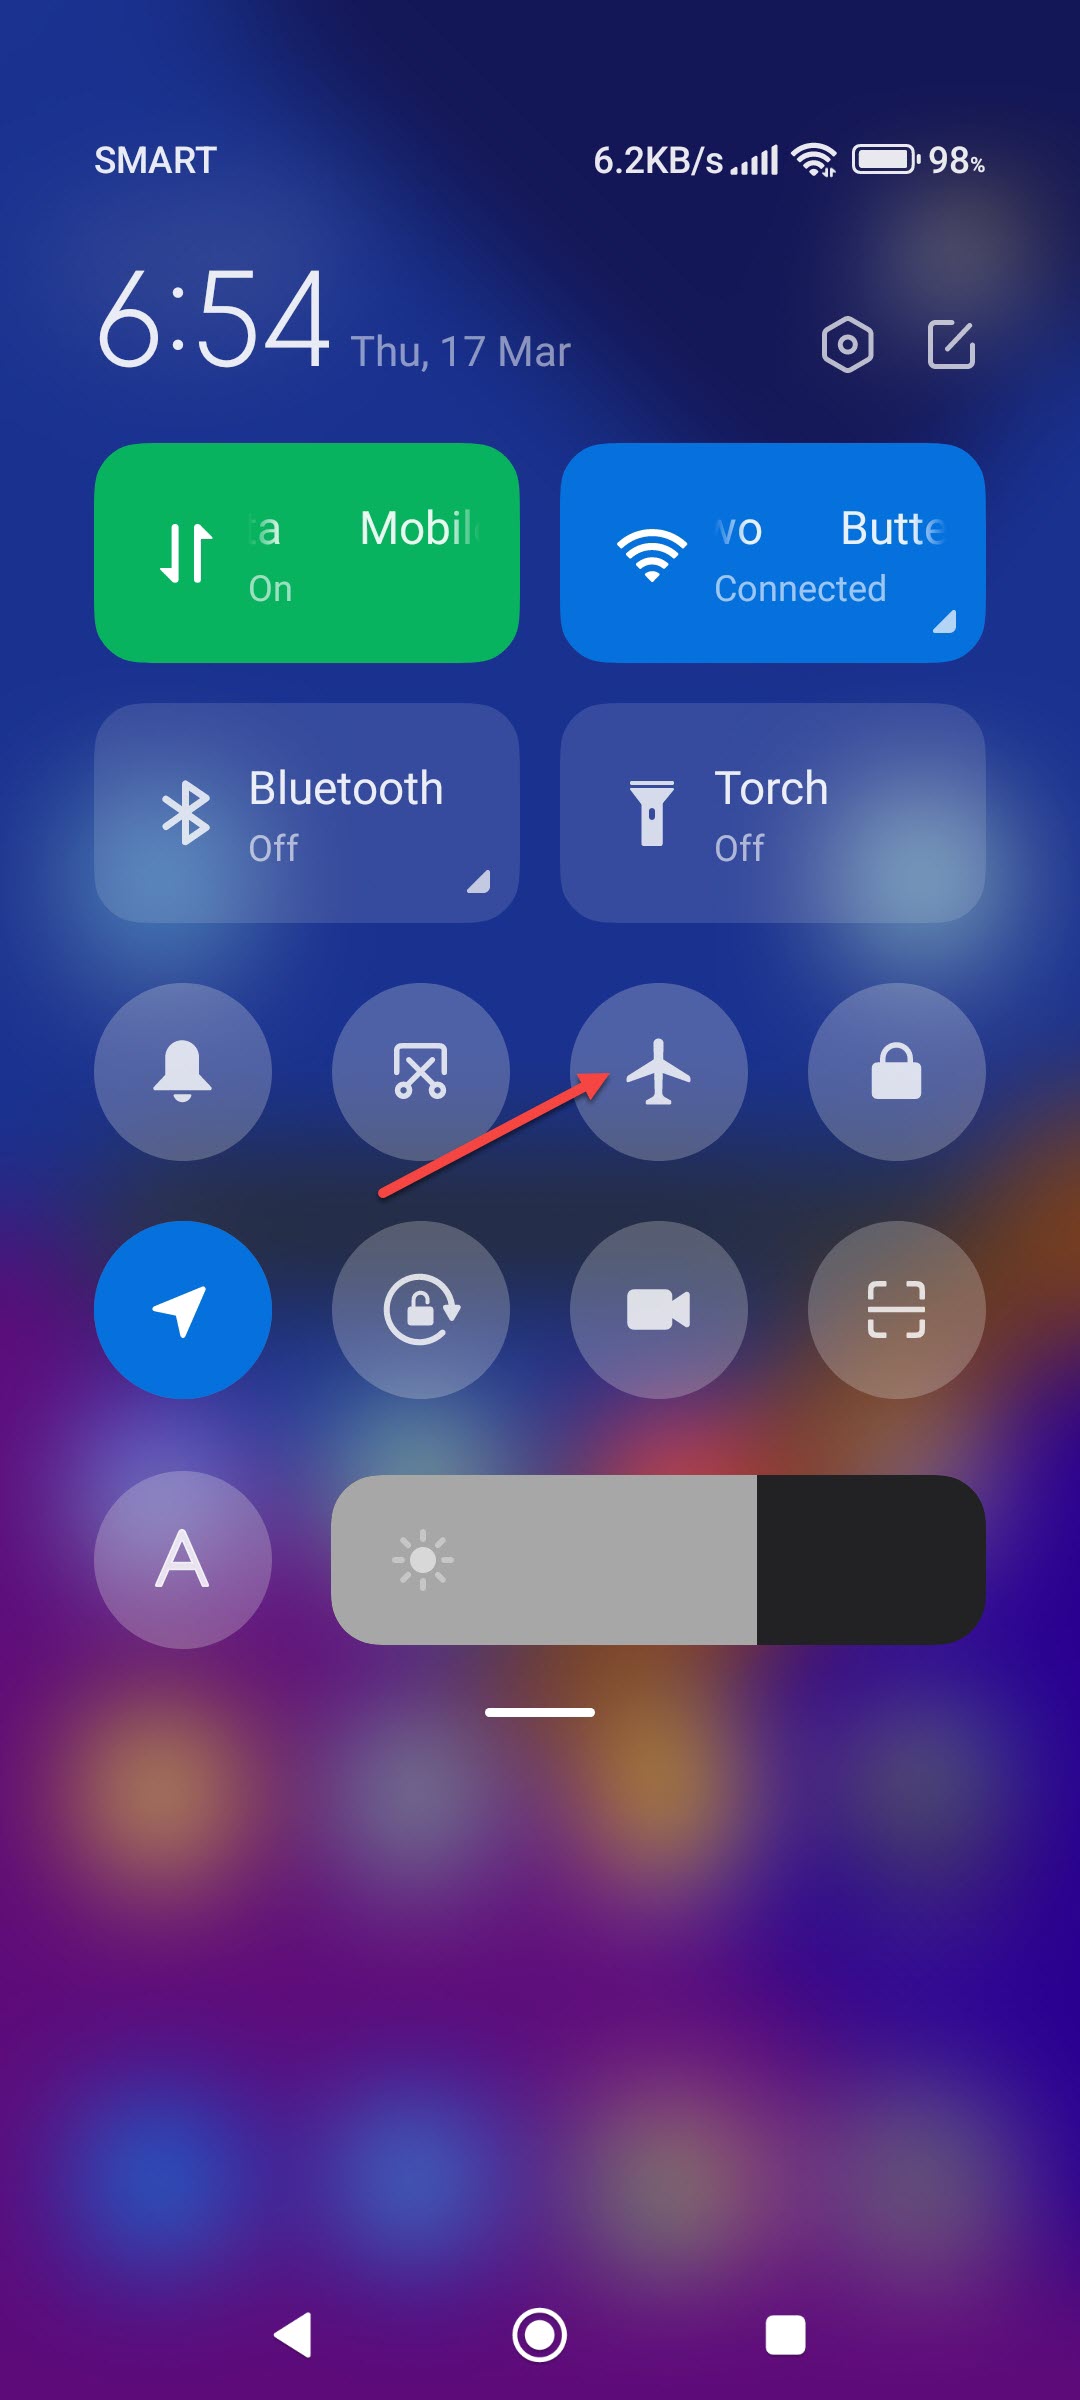 Tap on the airplane icon after a few seconds